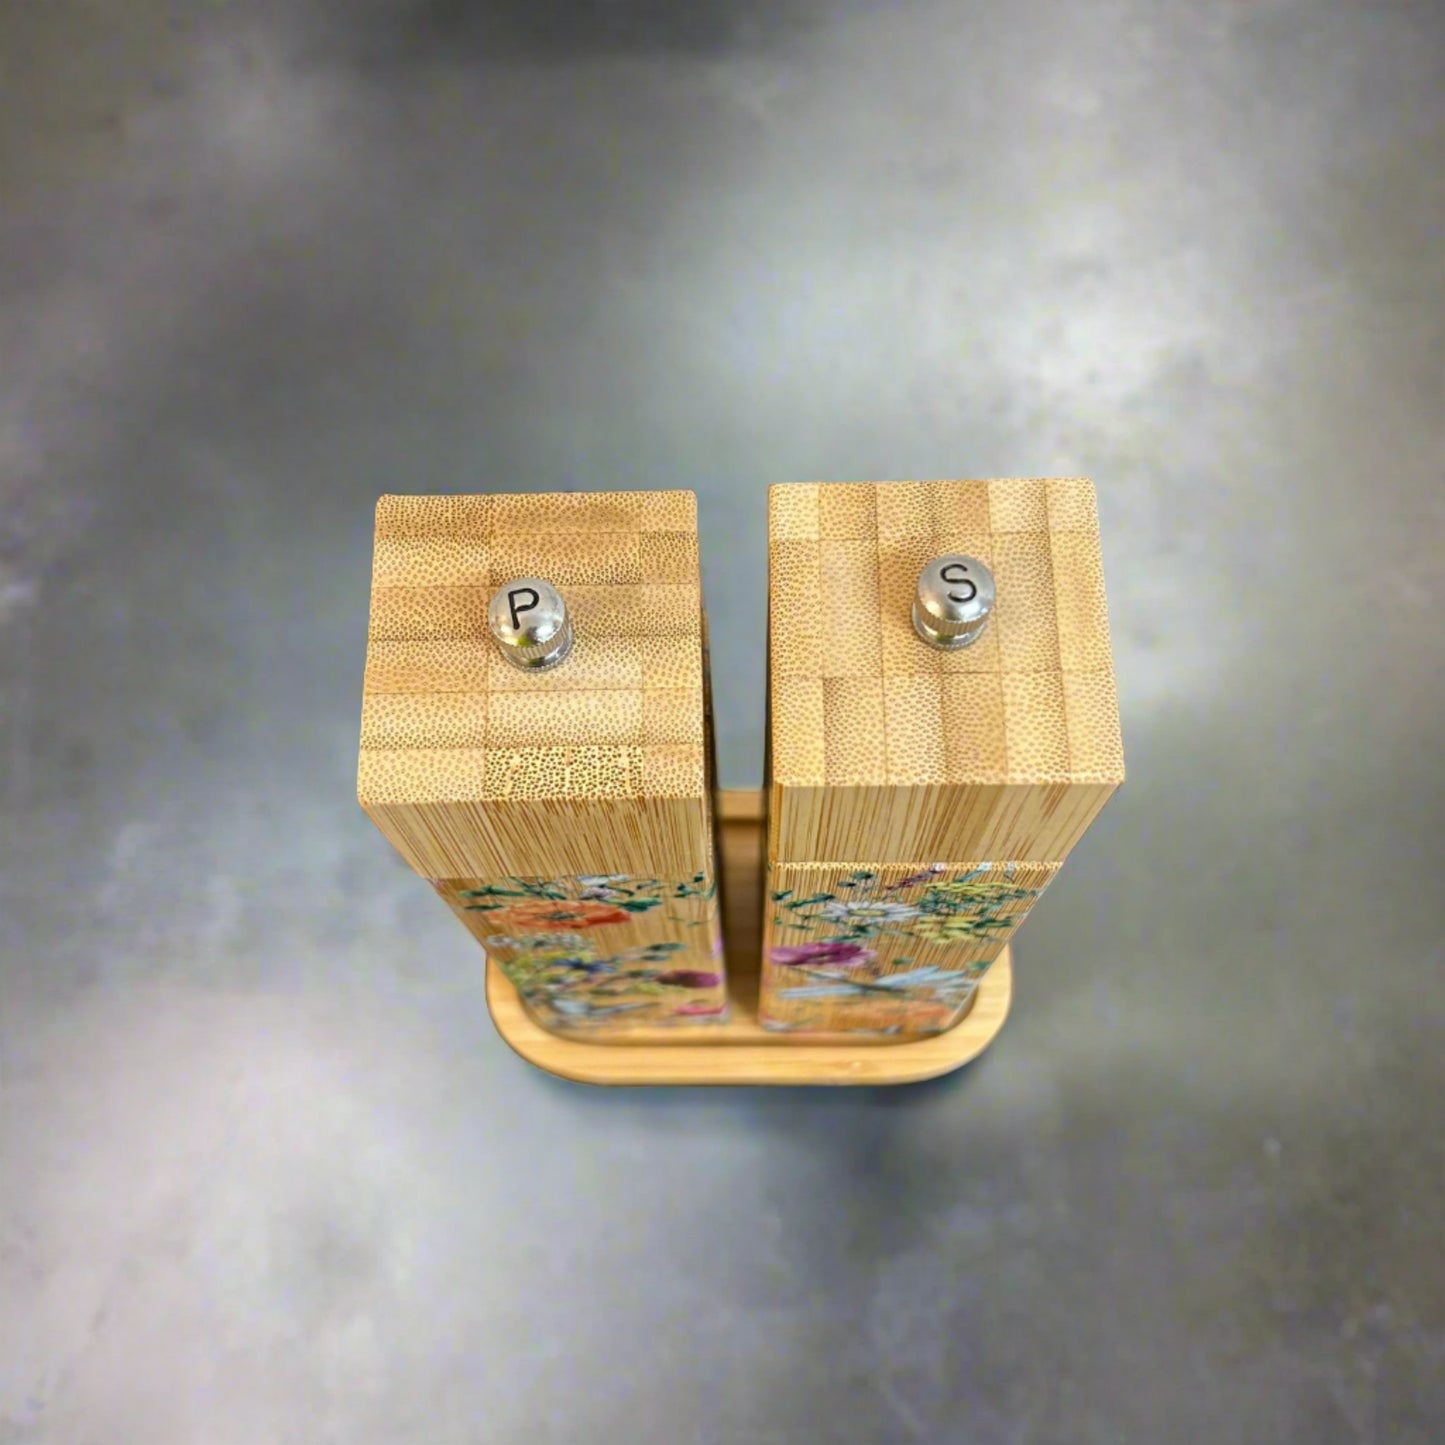 Bamboo Salt And Pepper Grinders